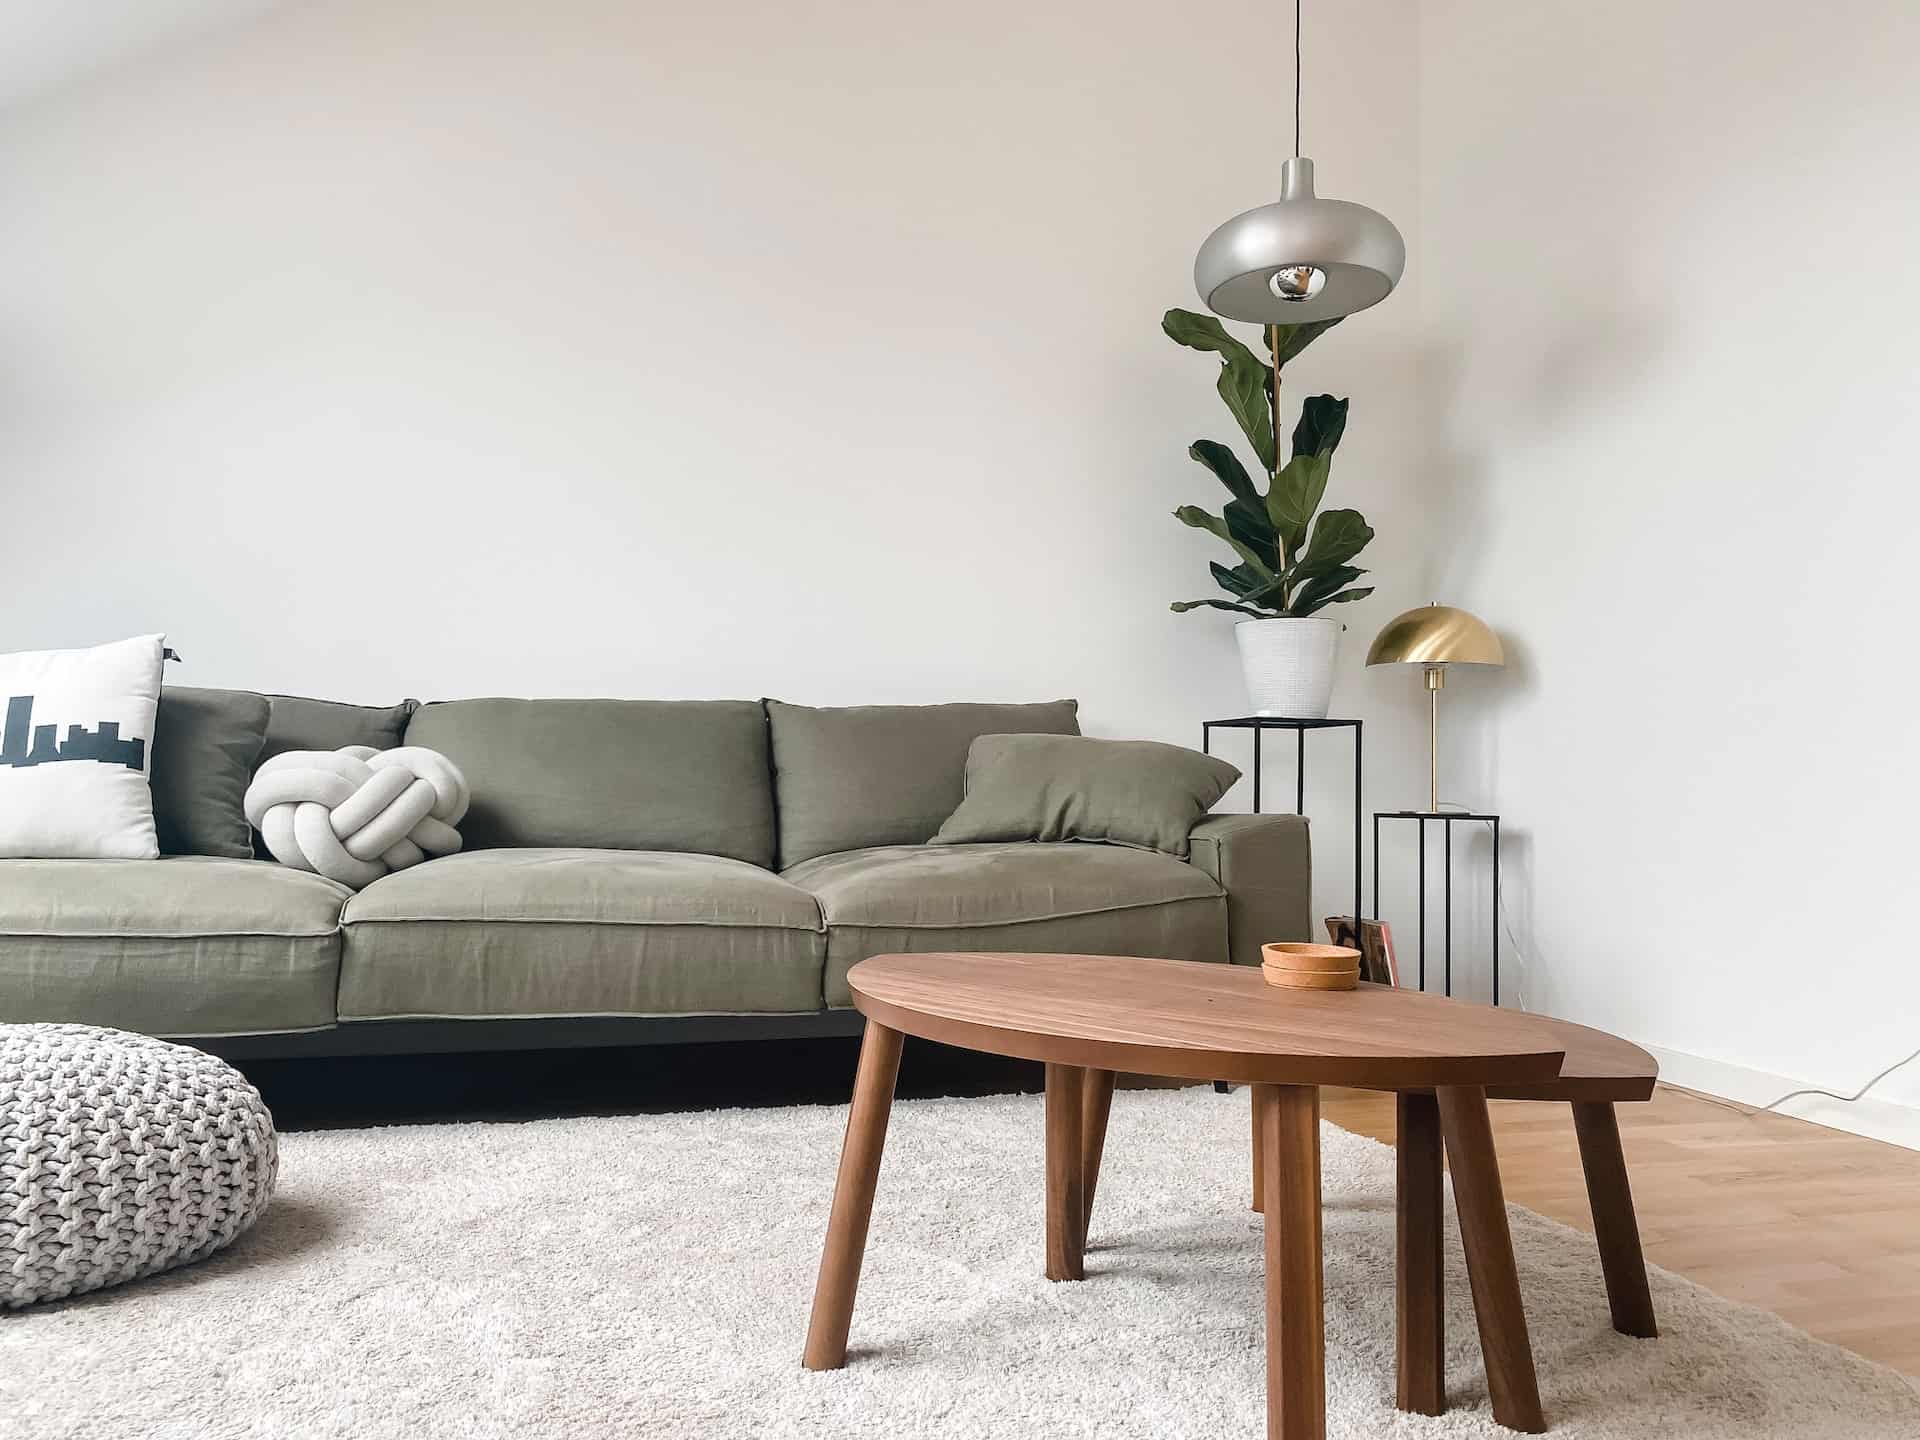 Living room in minimalist style – how to avoid the impression of emptiness?